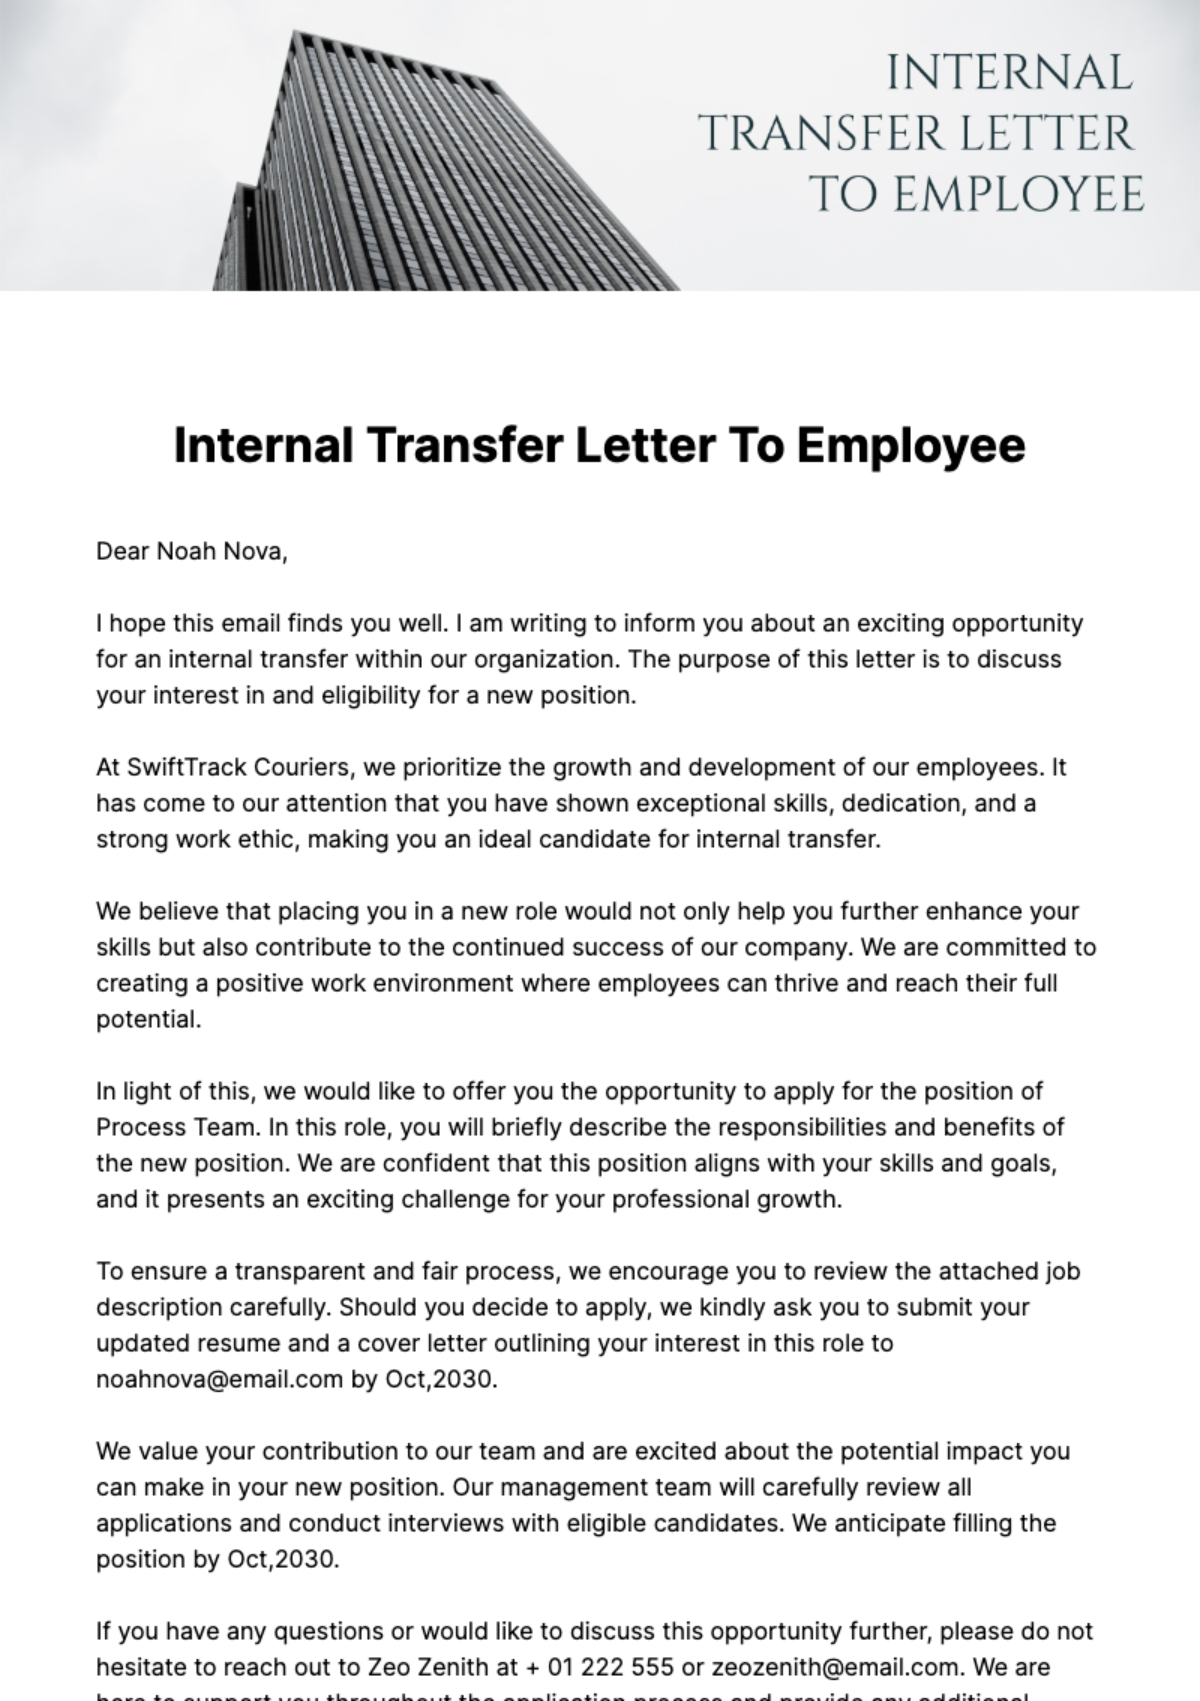 Free Internal Transfer Letter To Employee Template